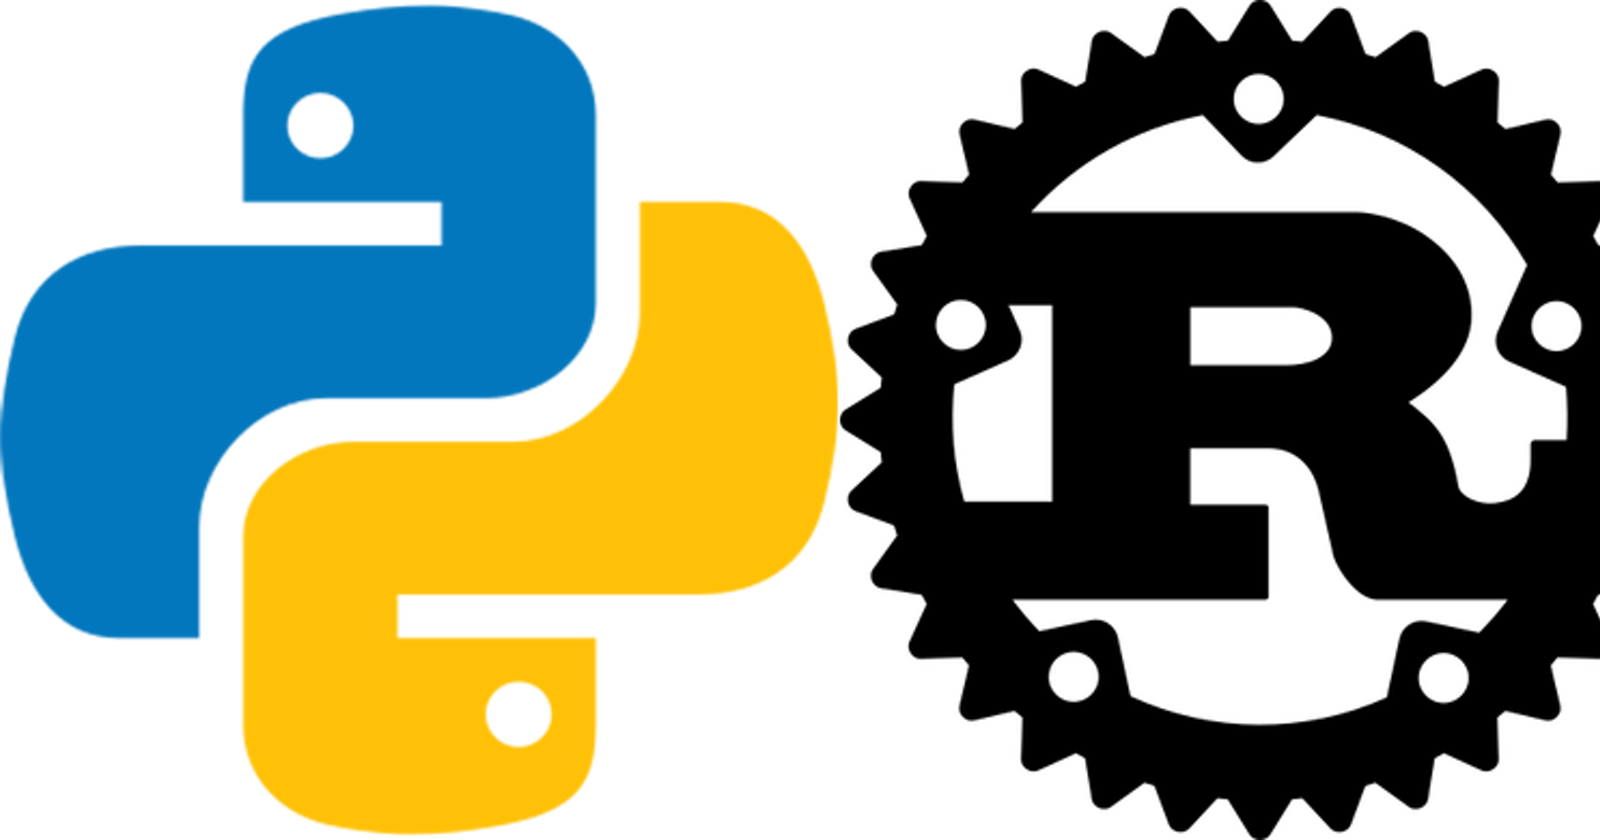 From Python to Rust